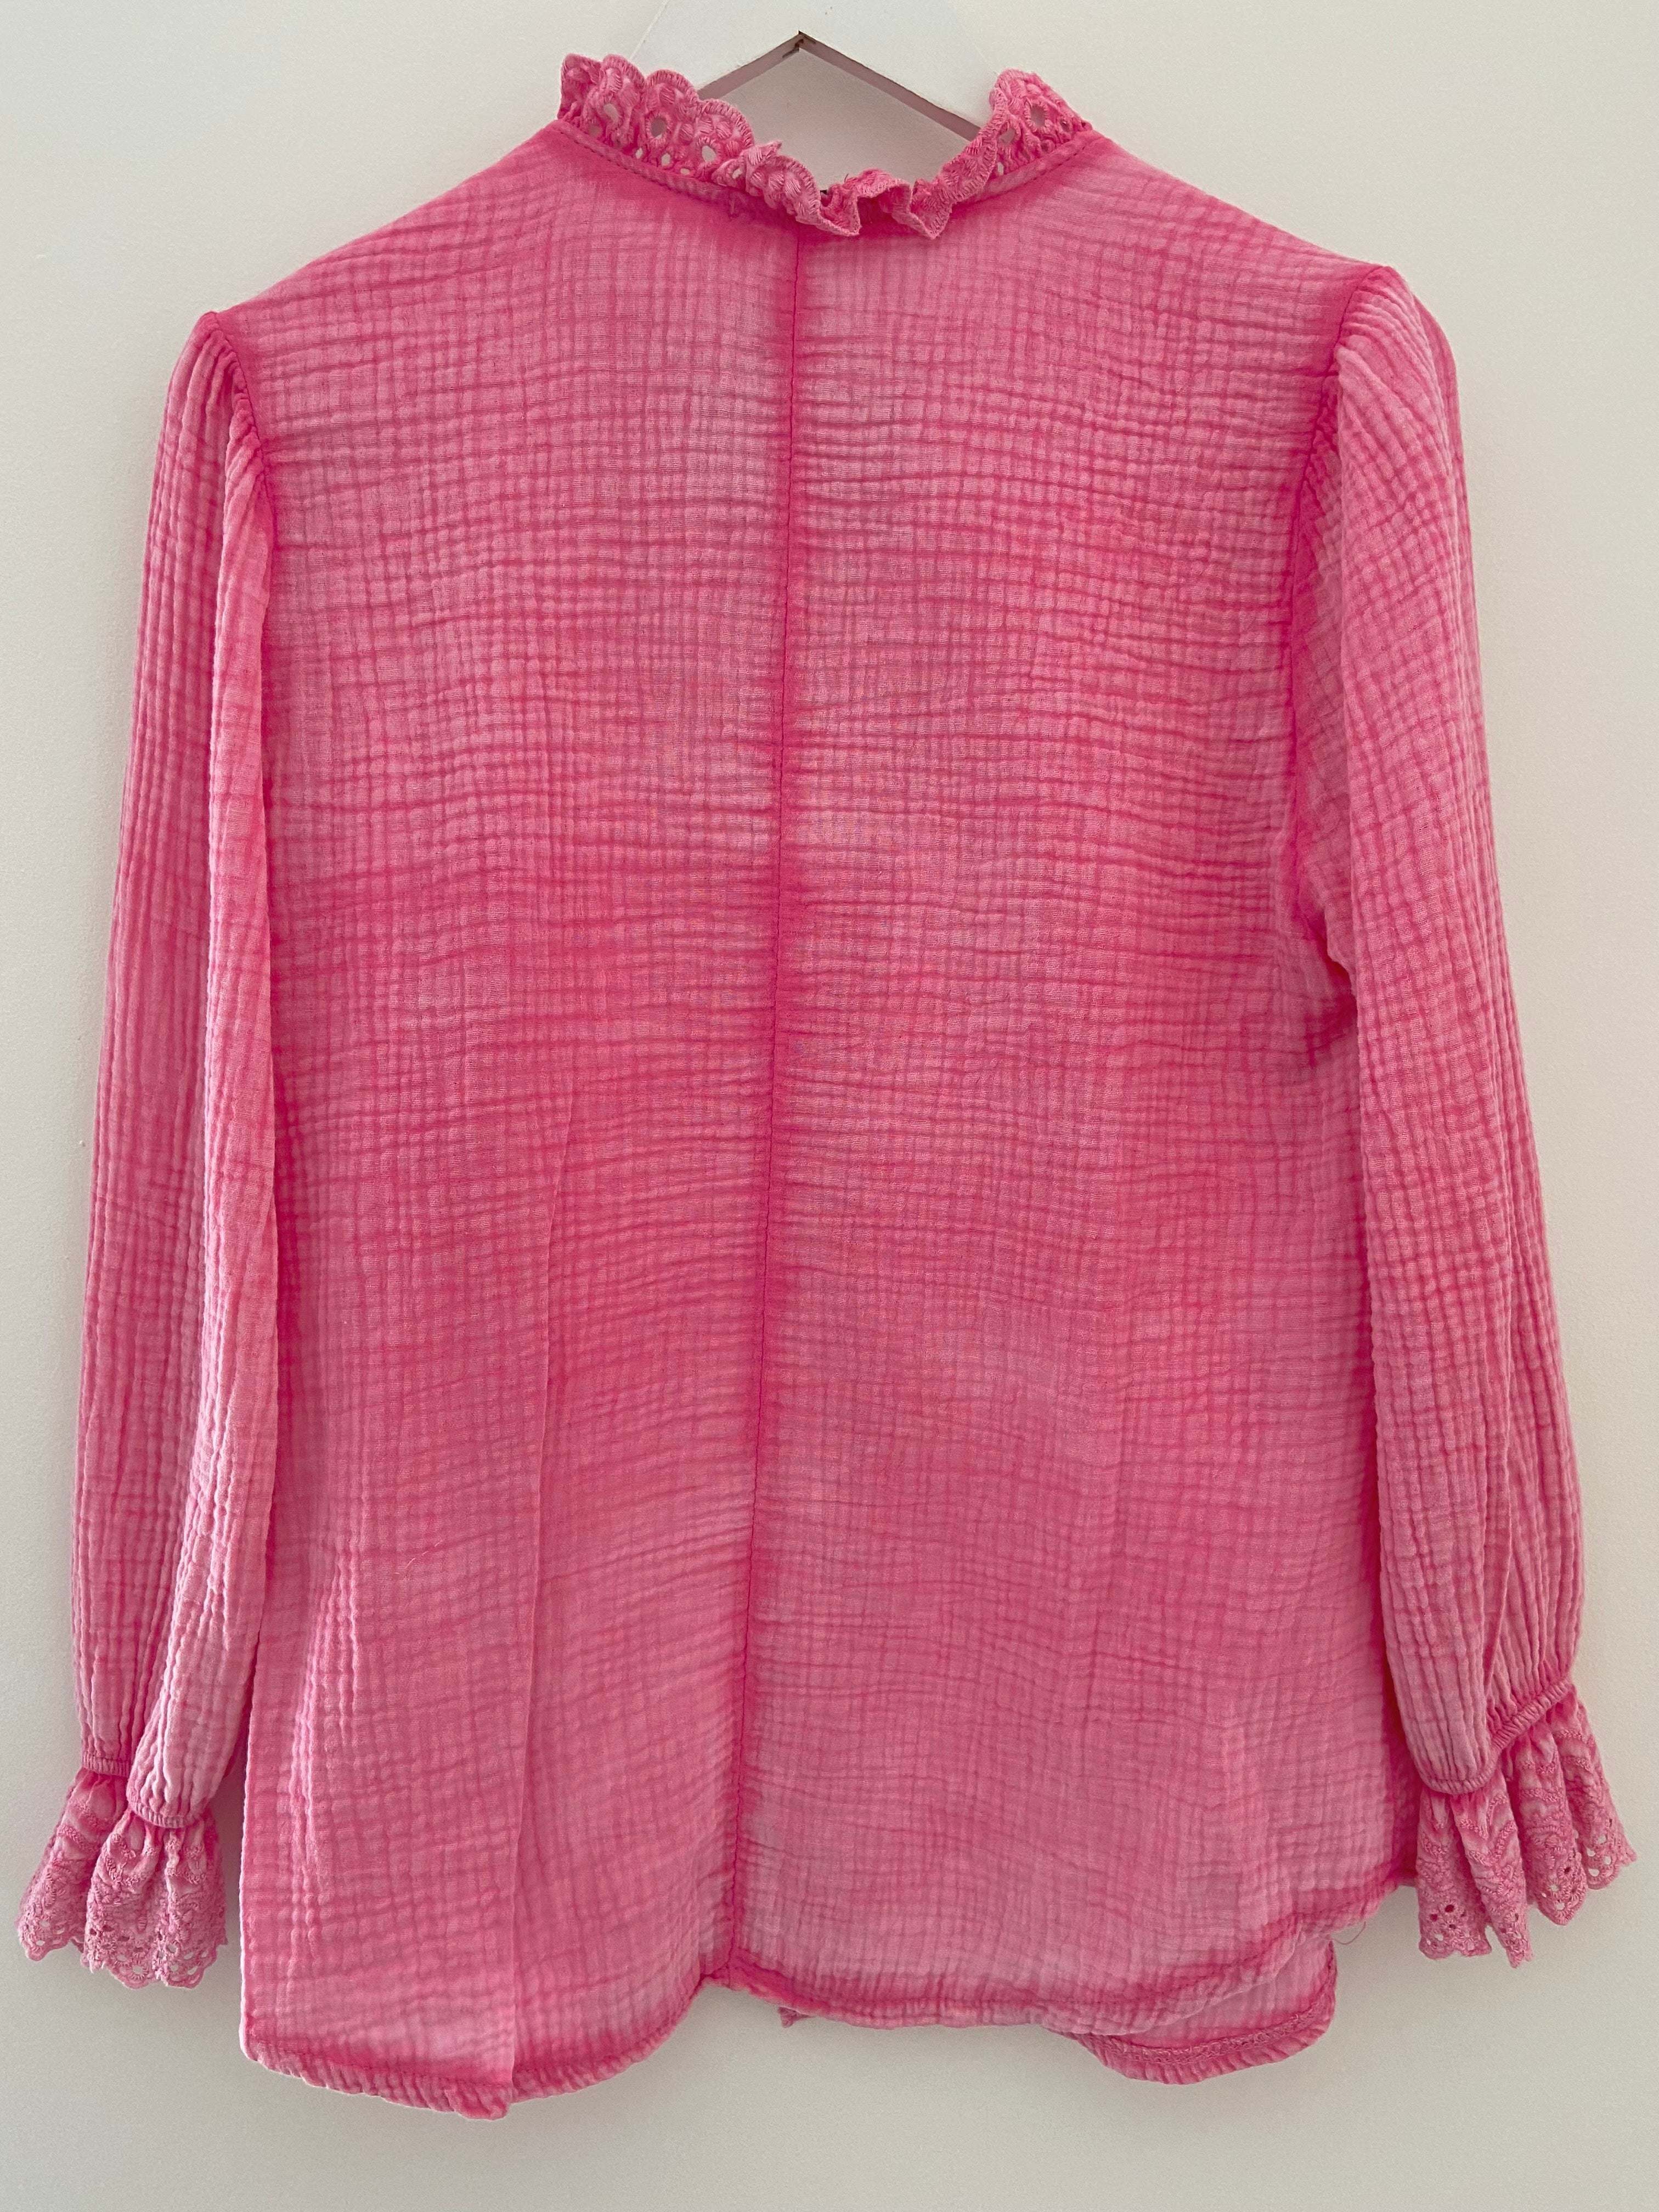 Cheesecloth Shirt in Candyfloss Pink